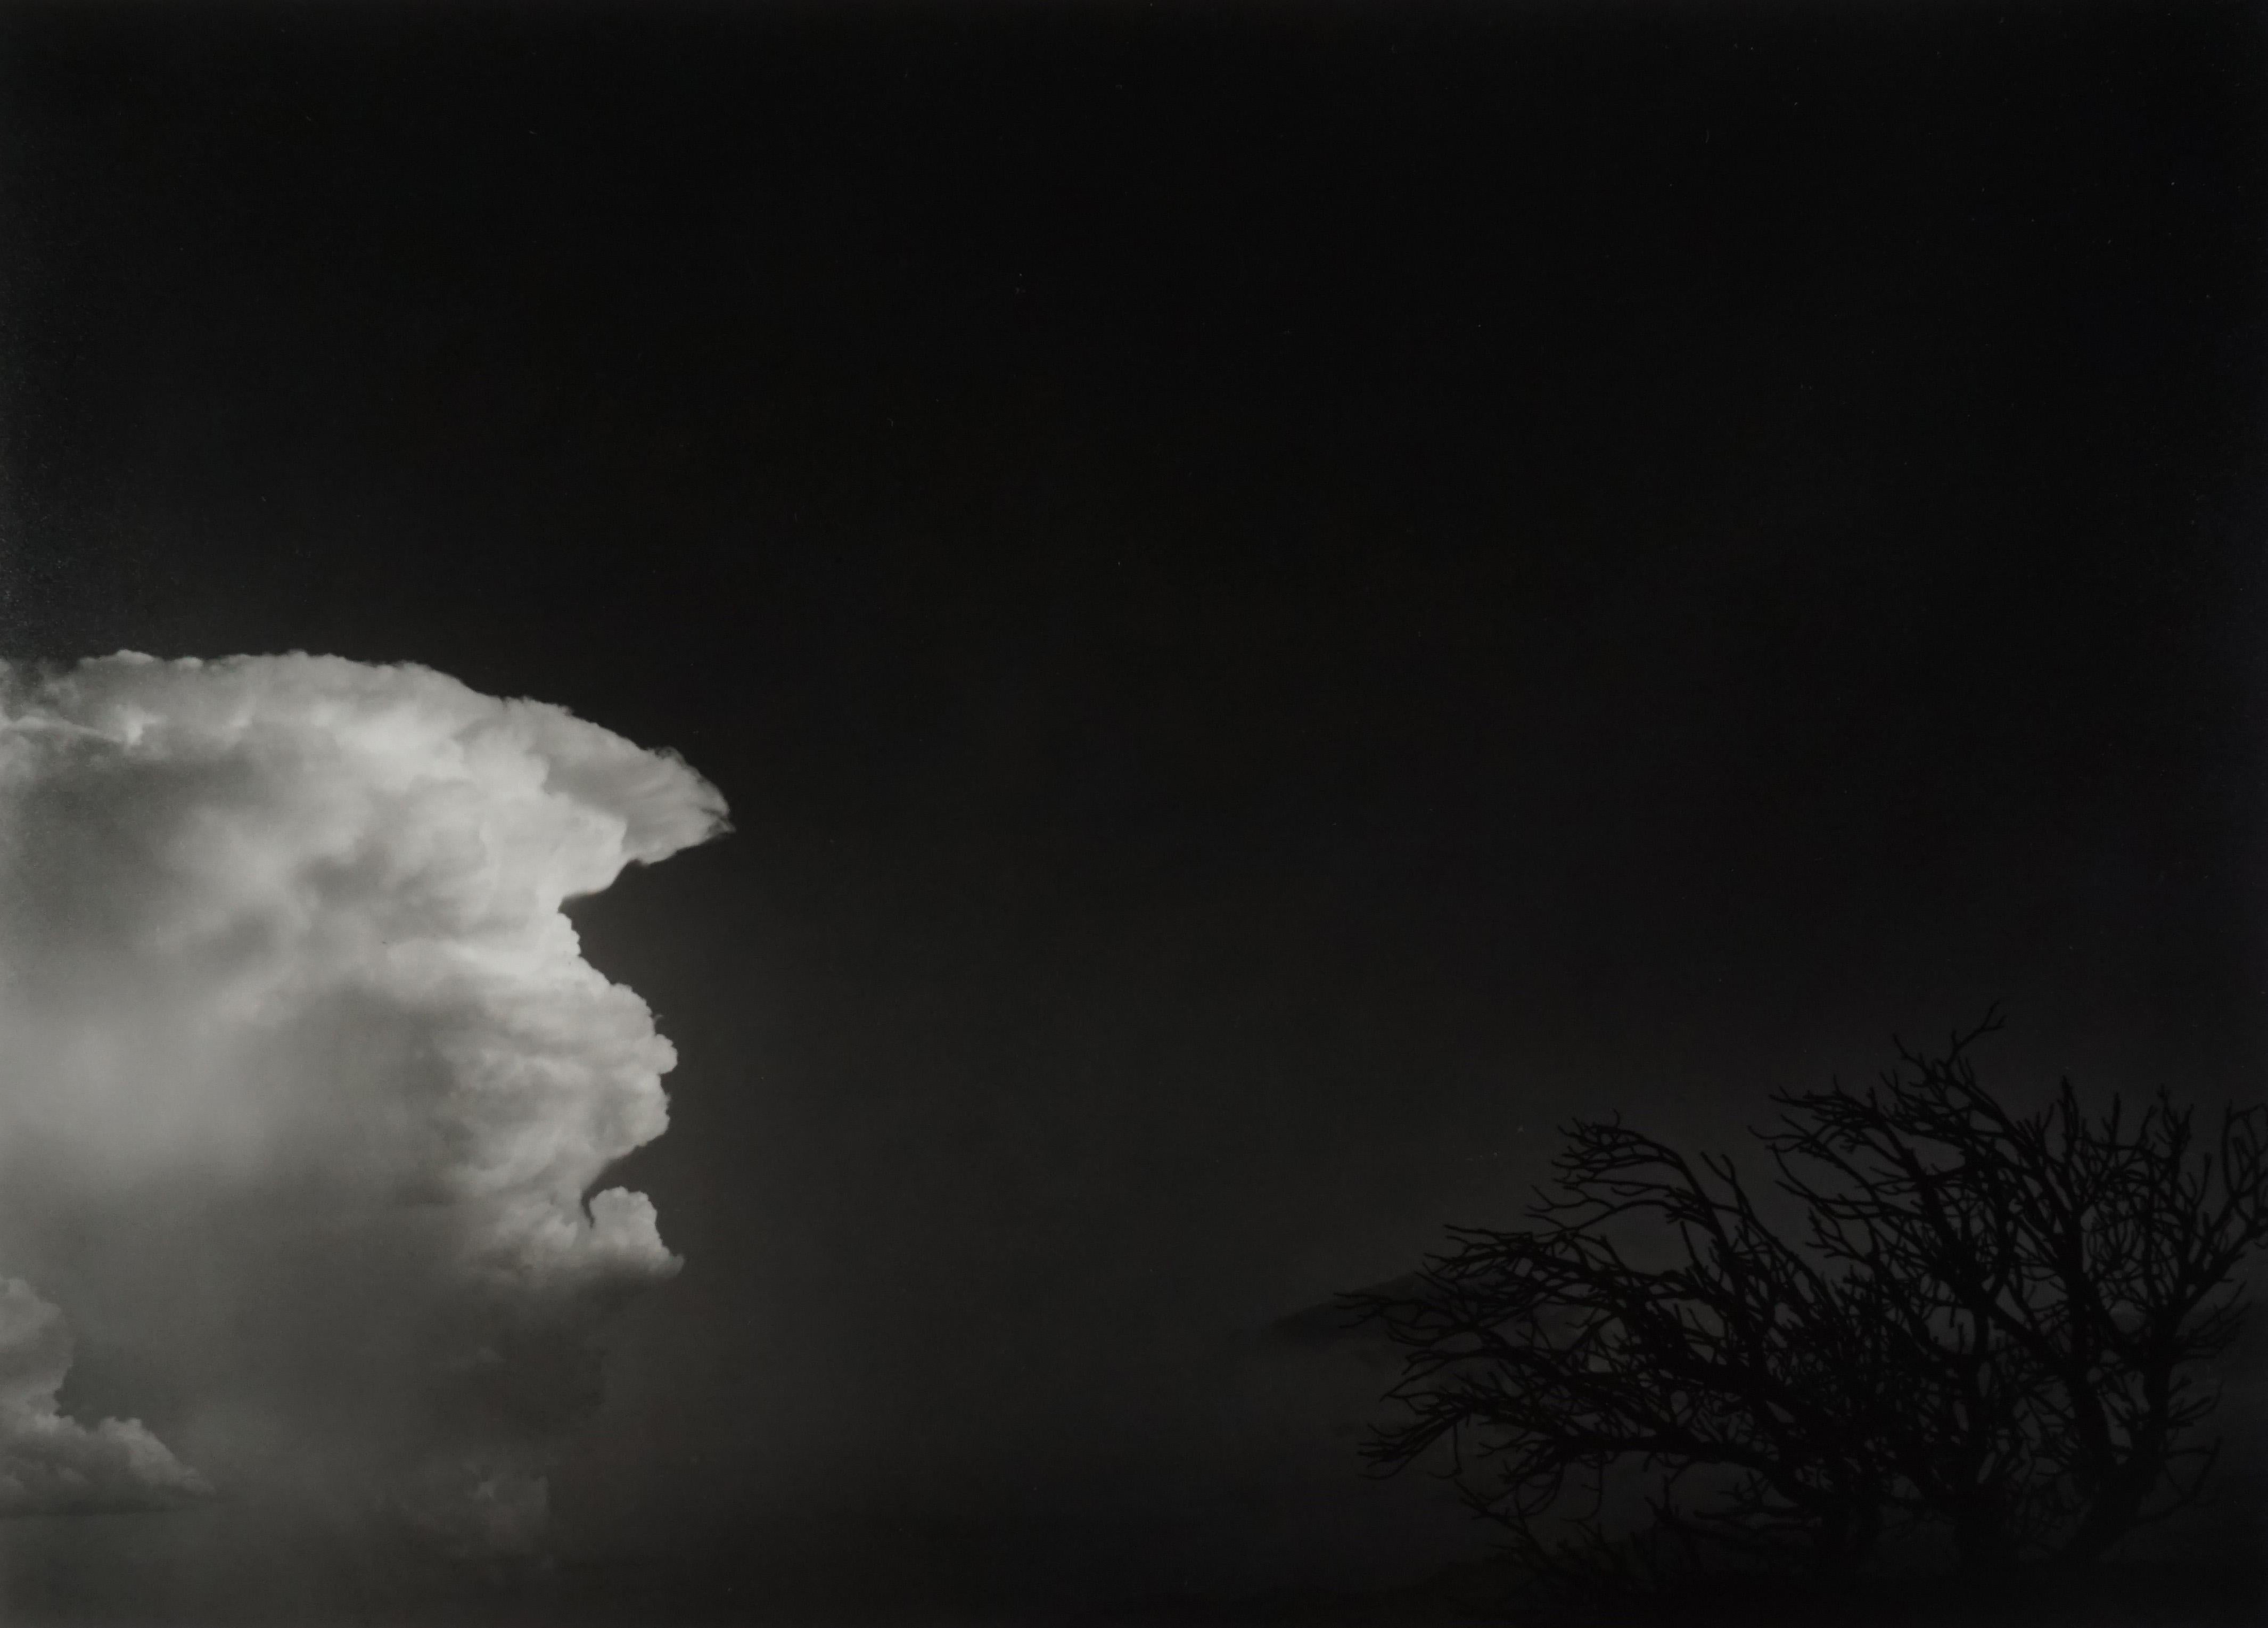 Paul Caponigro Black and White Photograph - Tree & Cloud, New Mexico